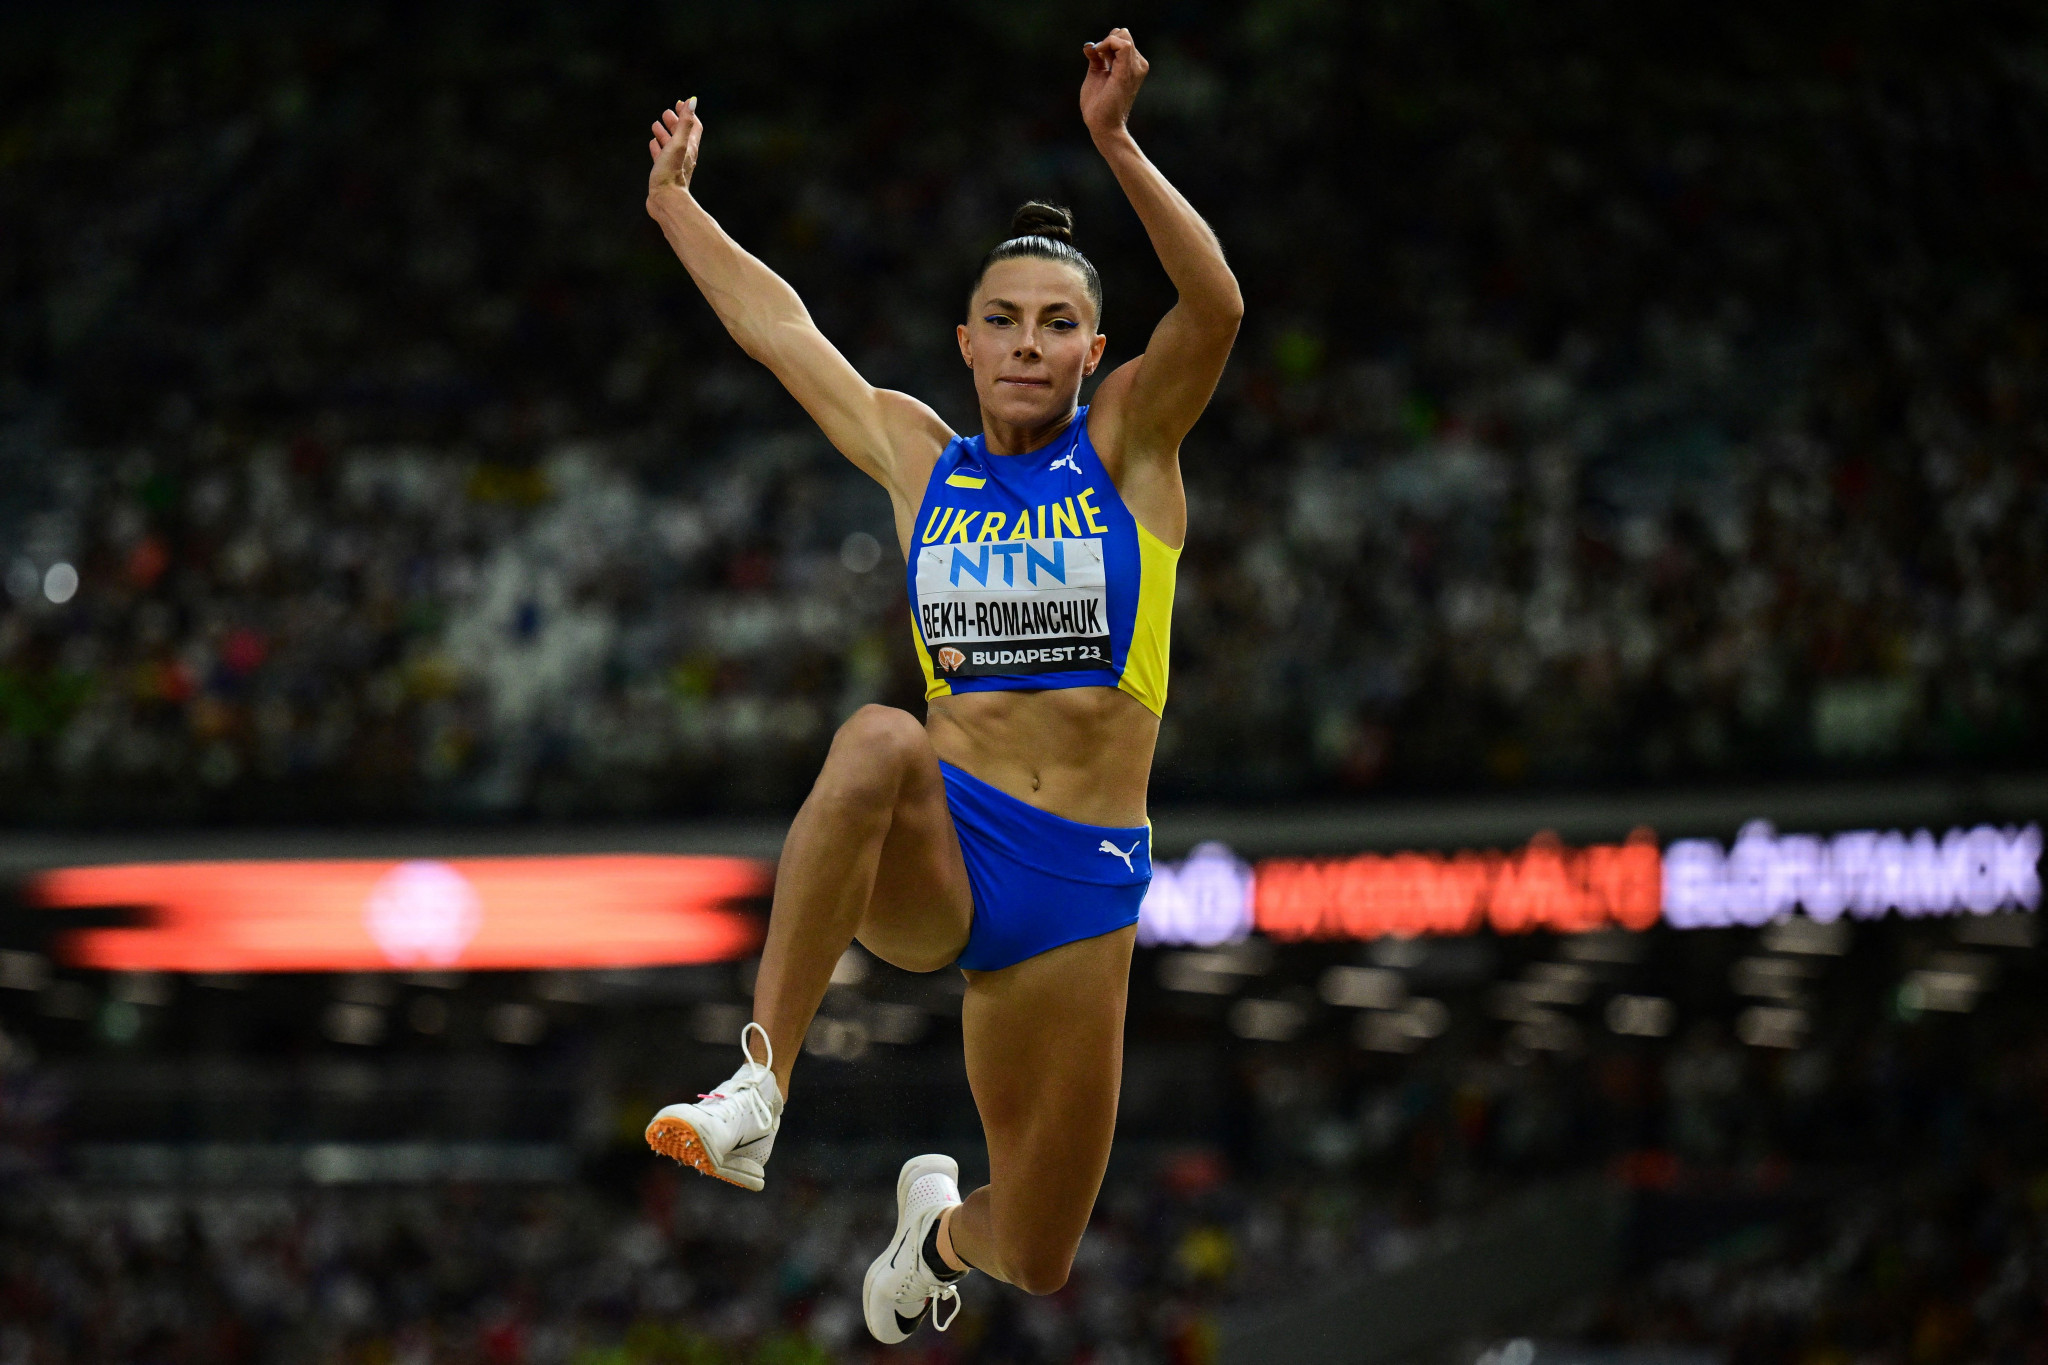 Ukraine's European champion Maryna Bekh-Romanchuk had led in the women's triple jump from her first attempt of 15.00m, but had to settle for silver ©Getty Images